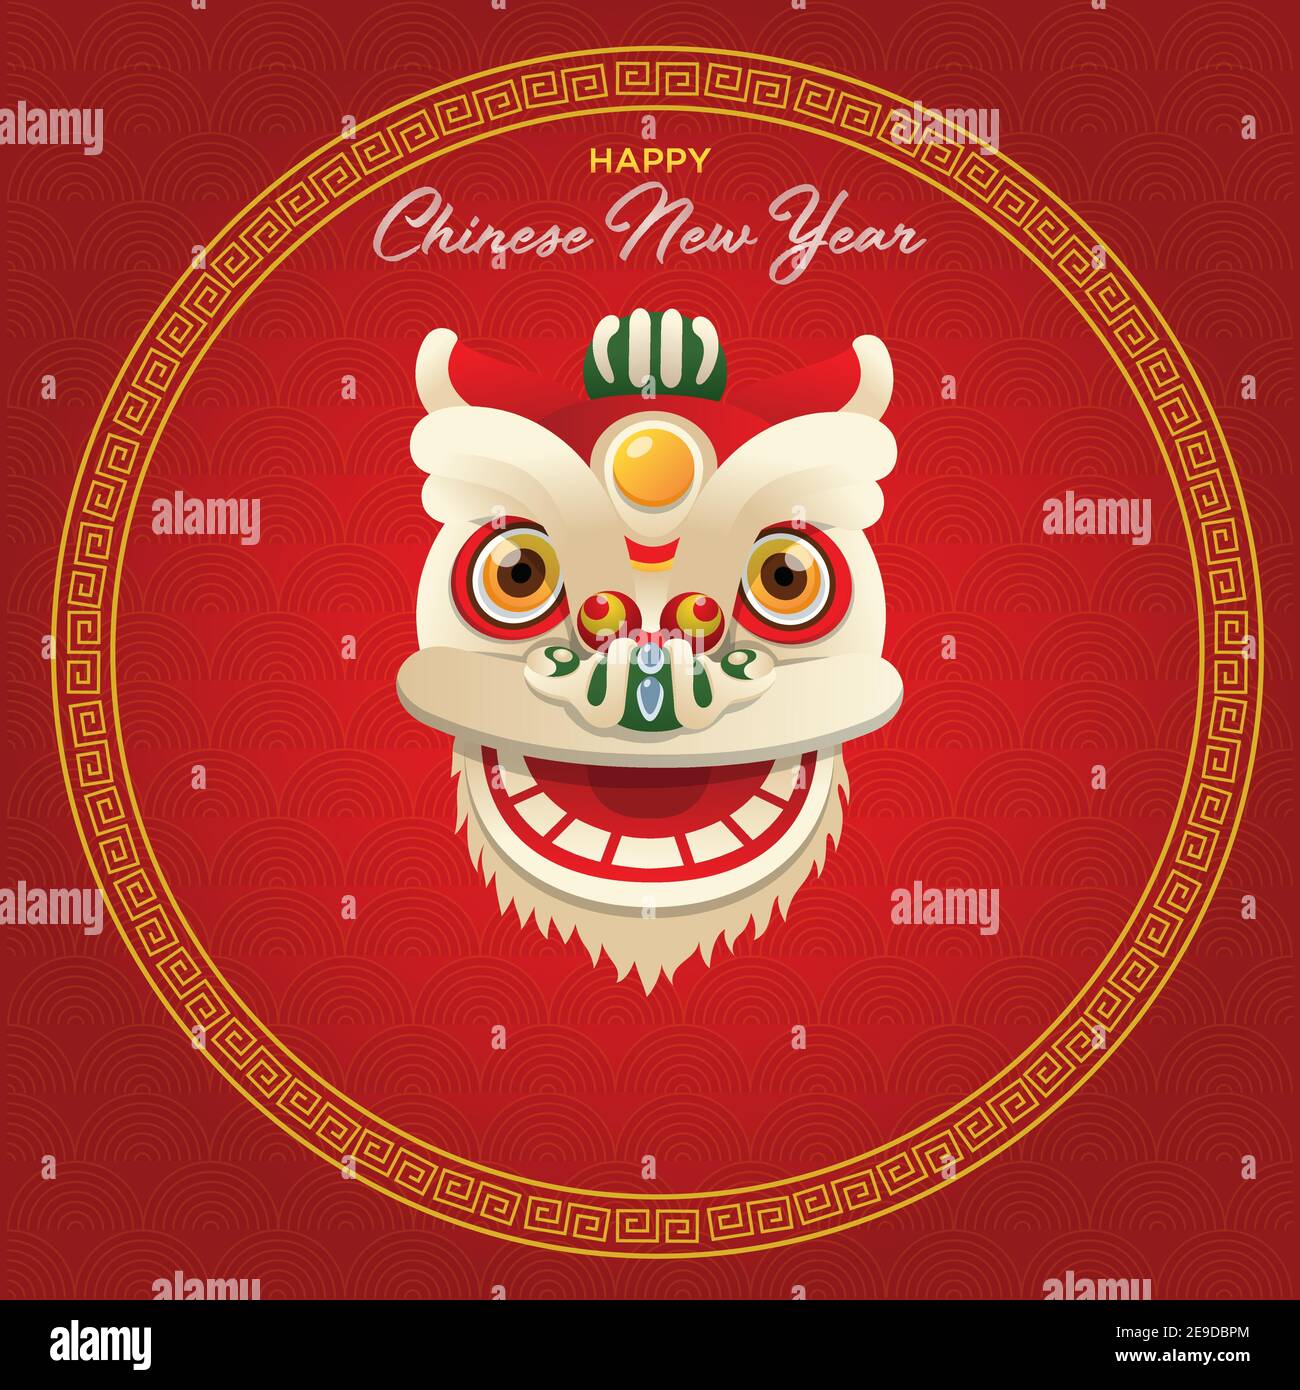 Illustration of chinese lion to celebrate chinese new year on a red background Stock Vector